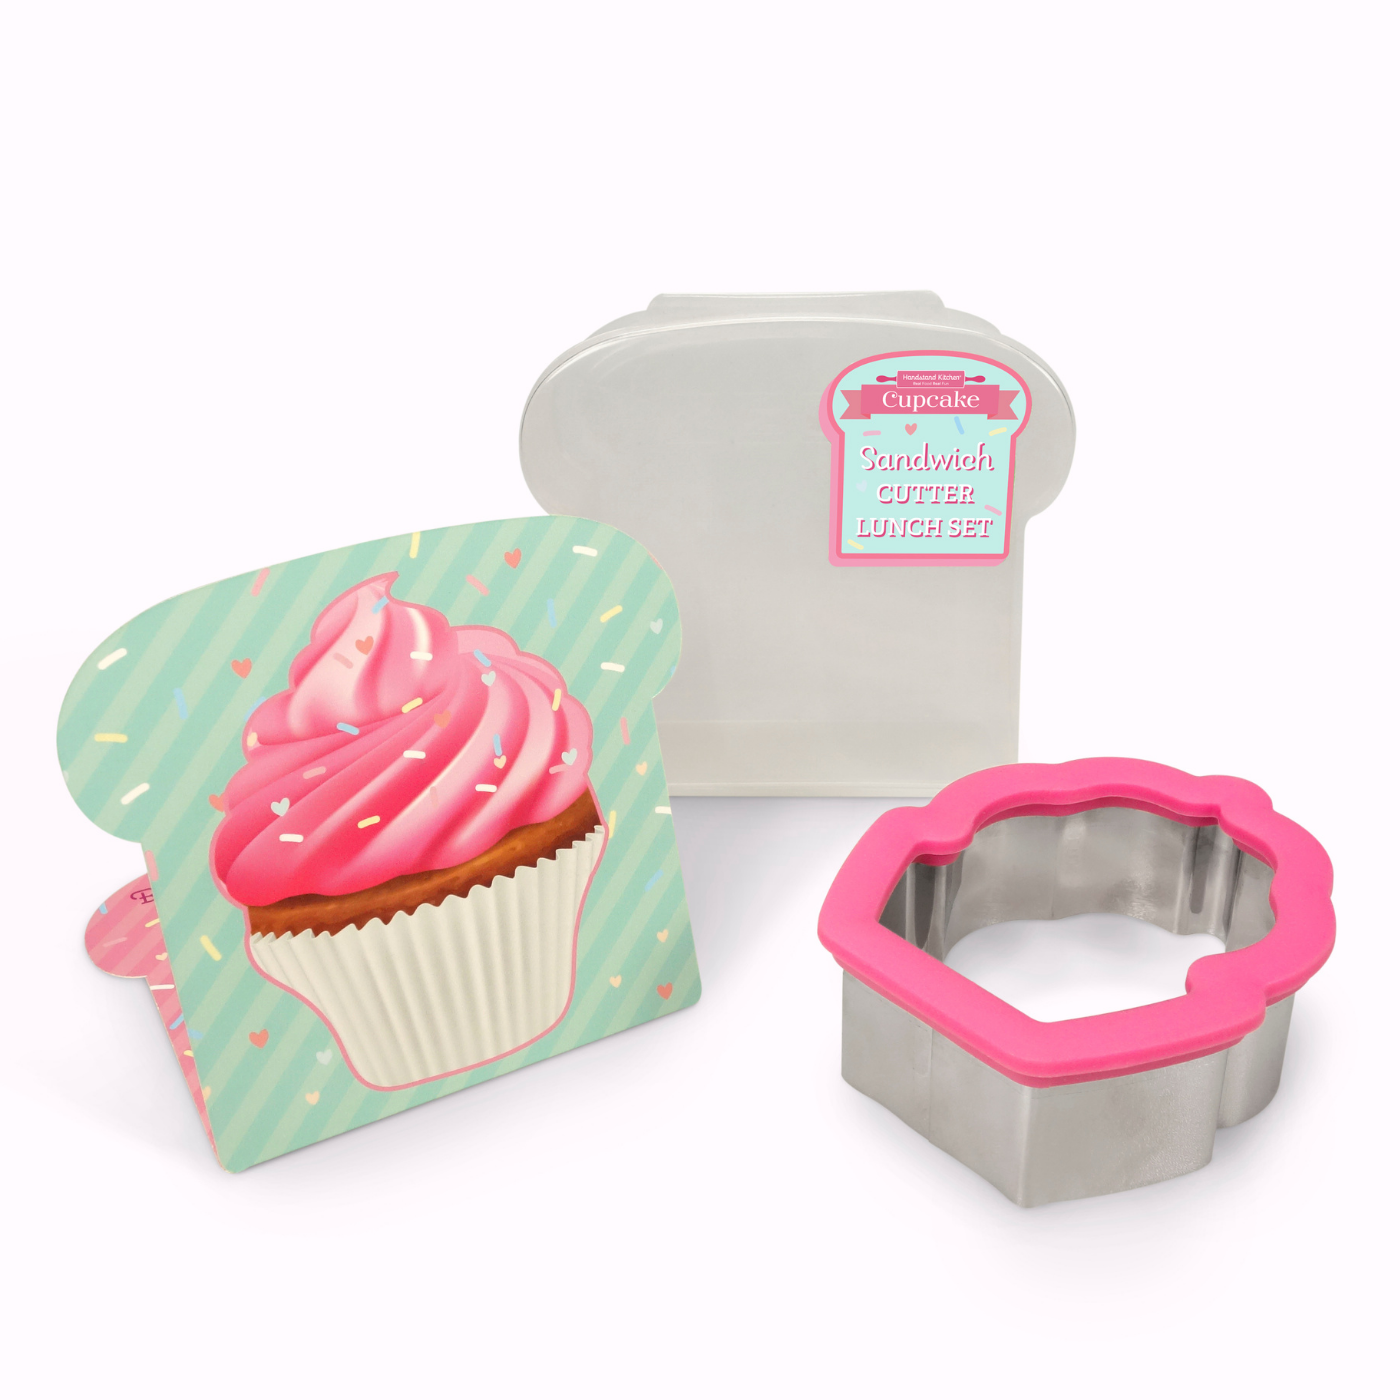 Out of box image of Cupcake Sandwich Cutter Lunch Set containing  1 cupcake stainless steel sandwich cutter, 1 sandwich box and recipes